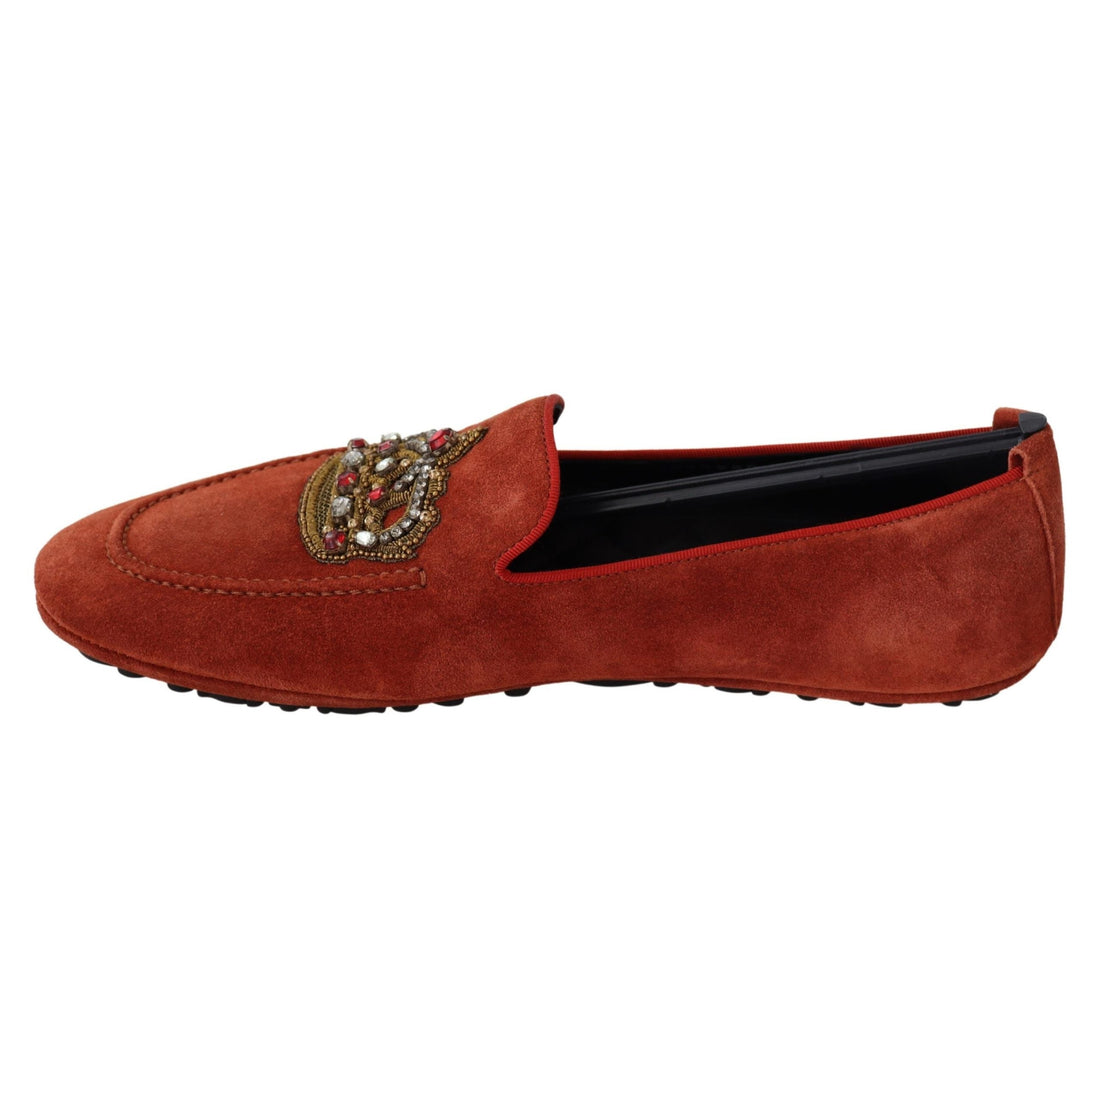 Dolce & Gabbana Opulent Orange Leather Loafers with Gold Embroidery